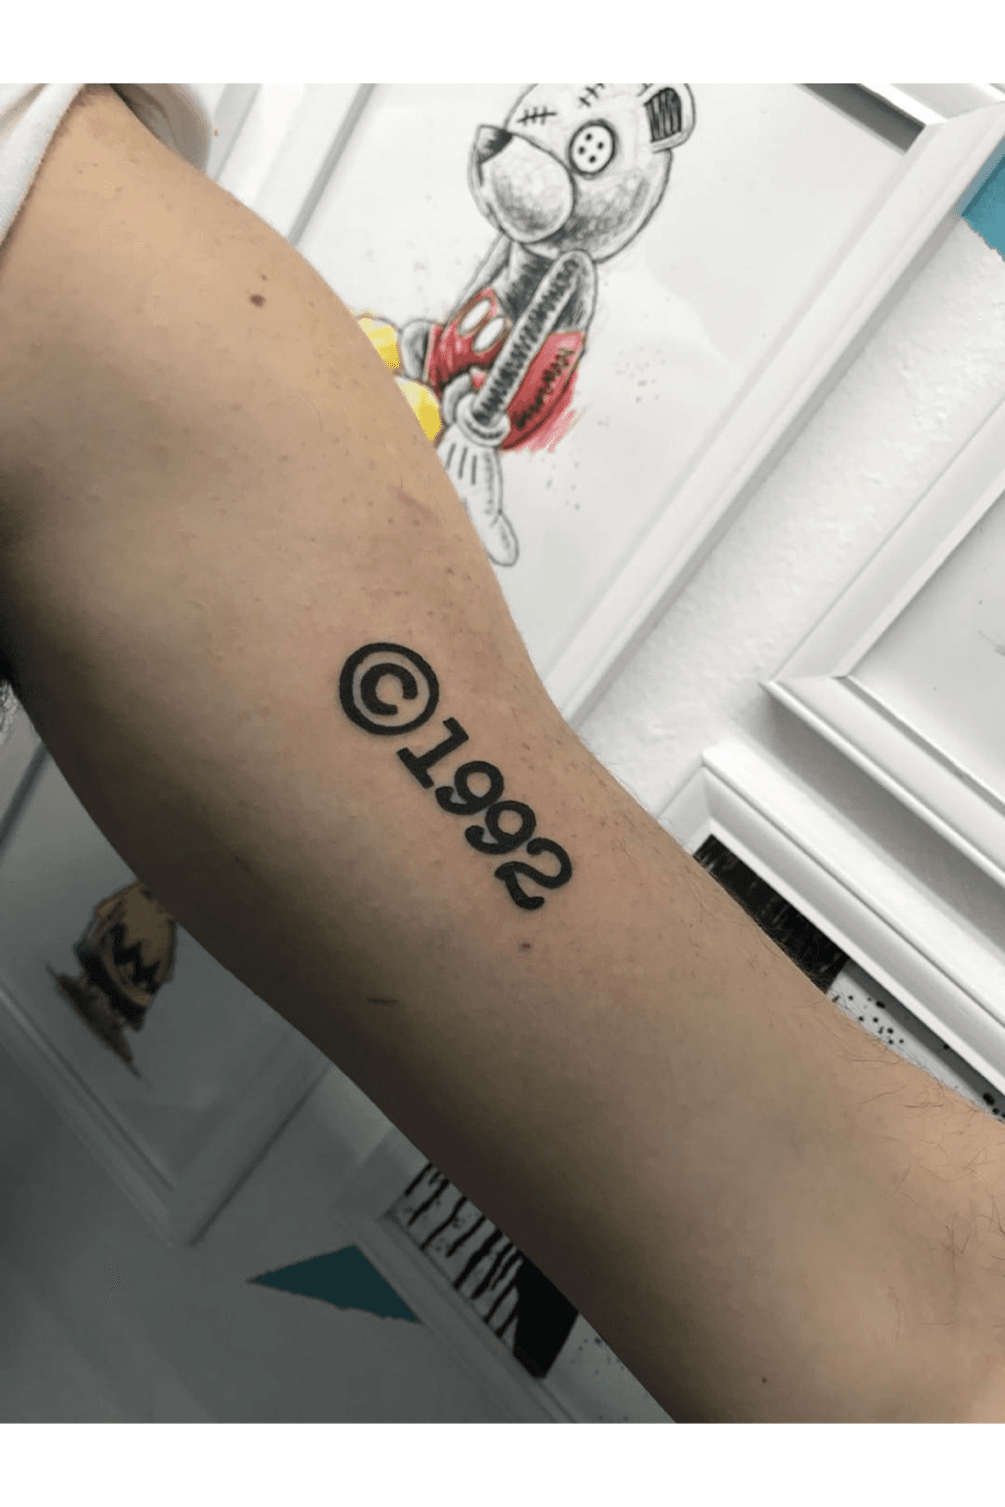 Top 63 Number Tattoo Ideas 2021 Inspiration Guide